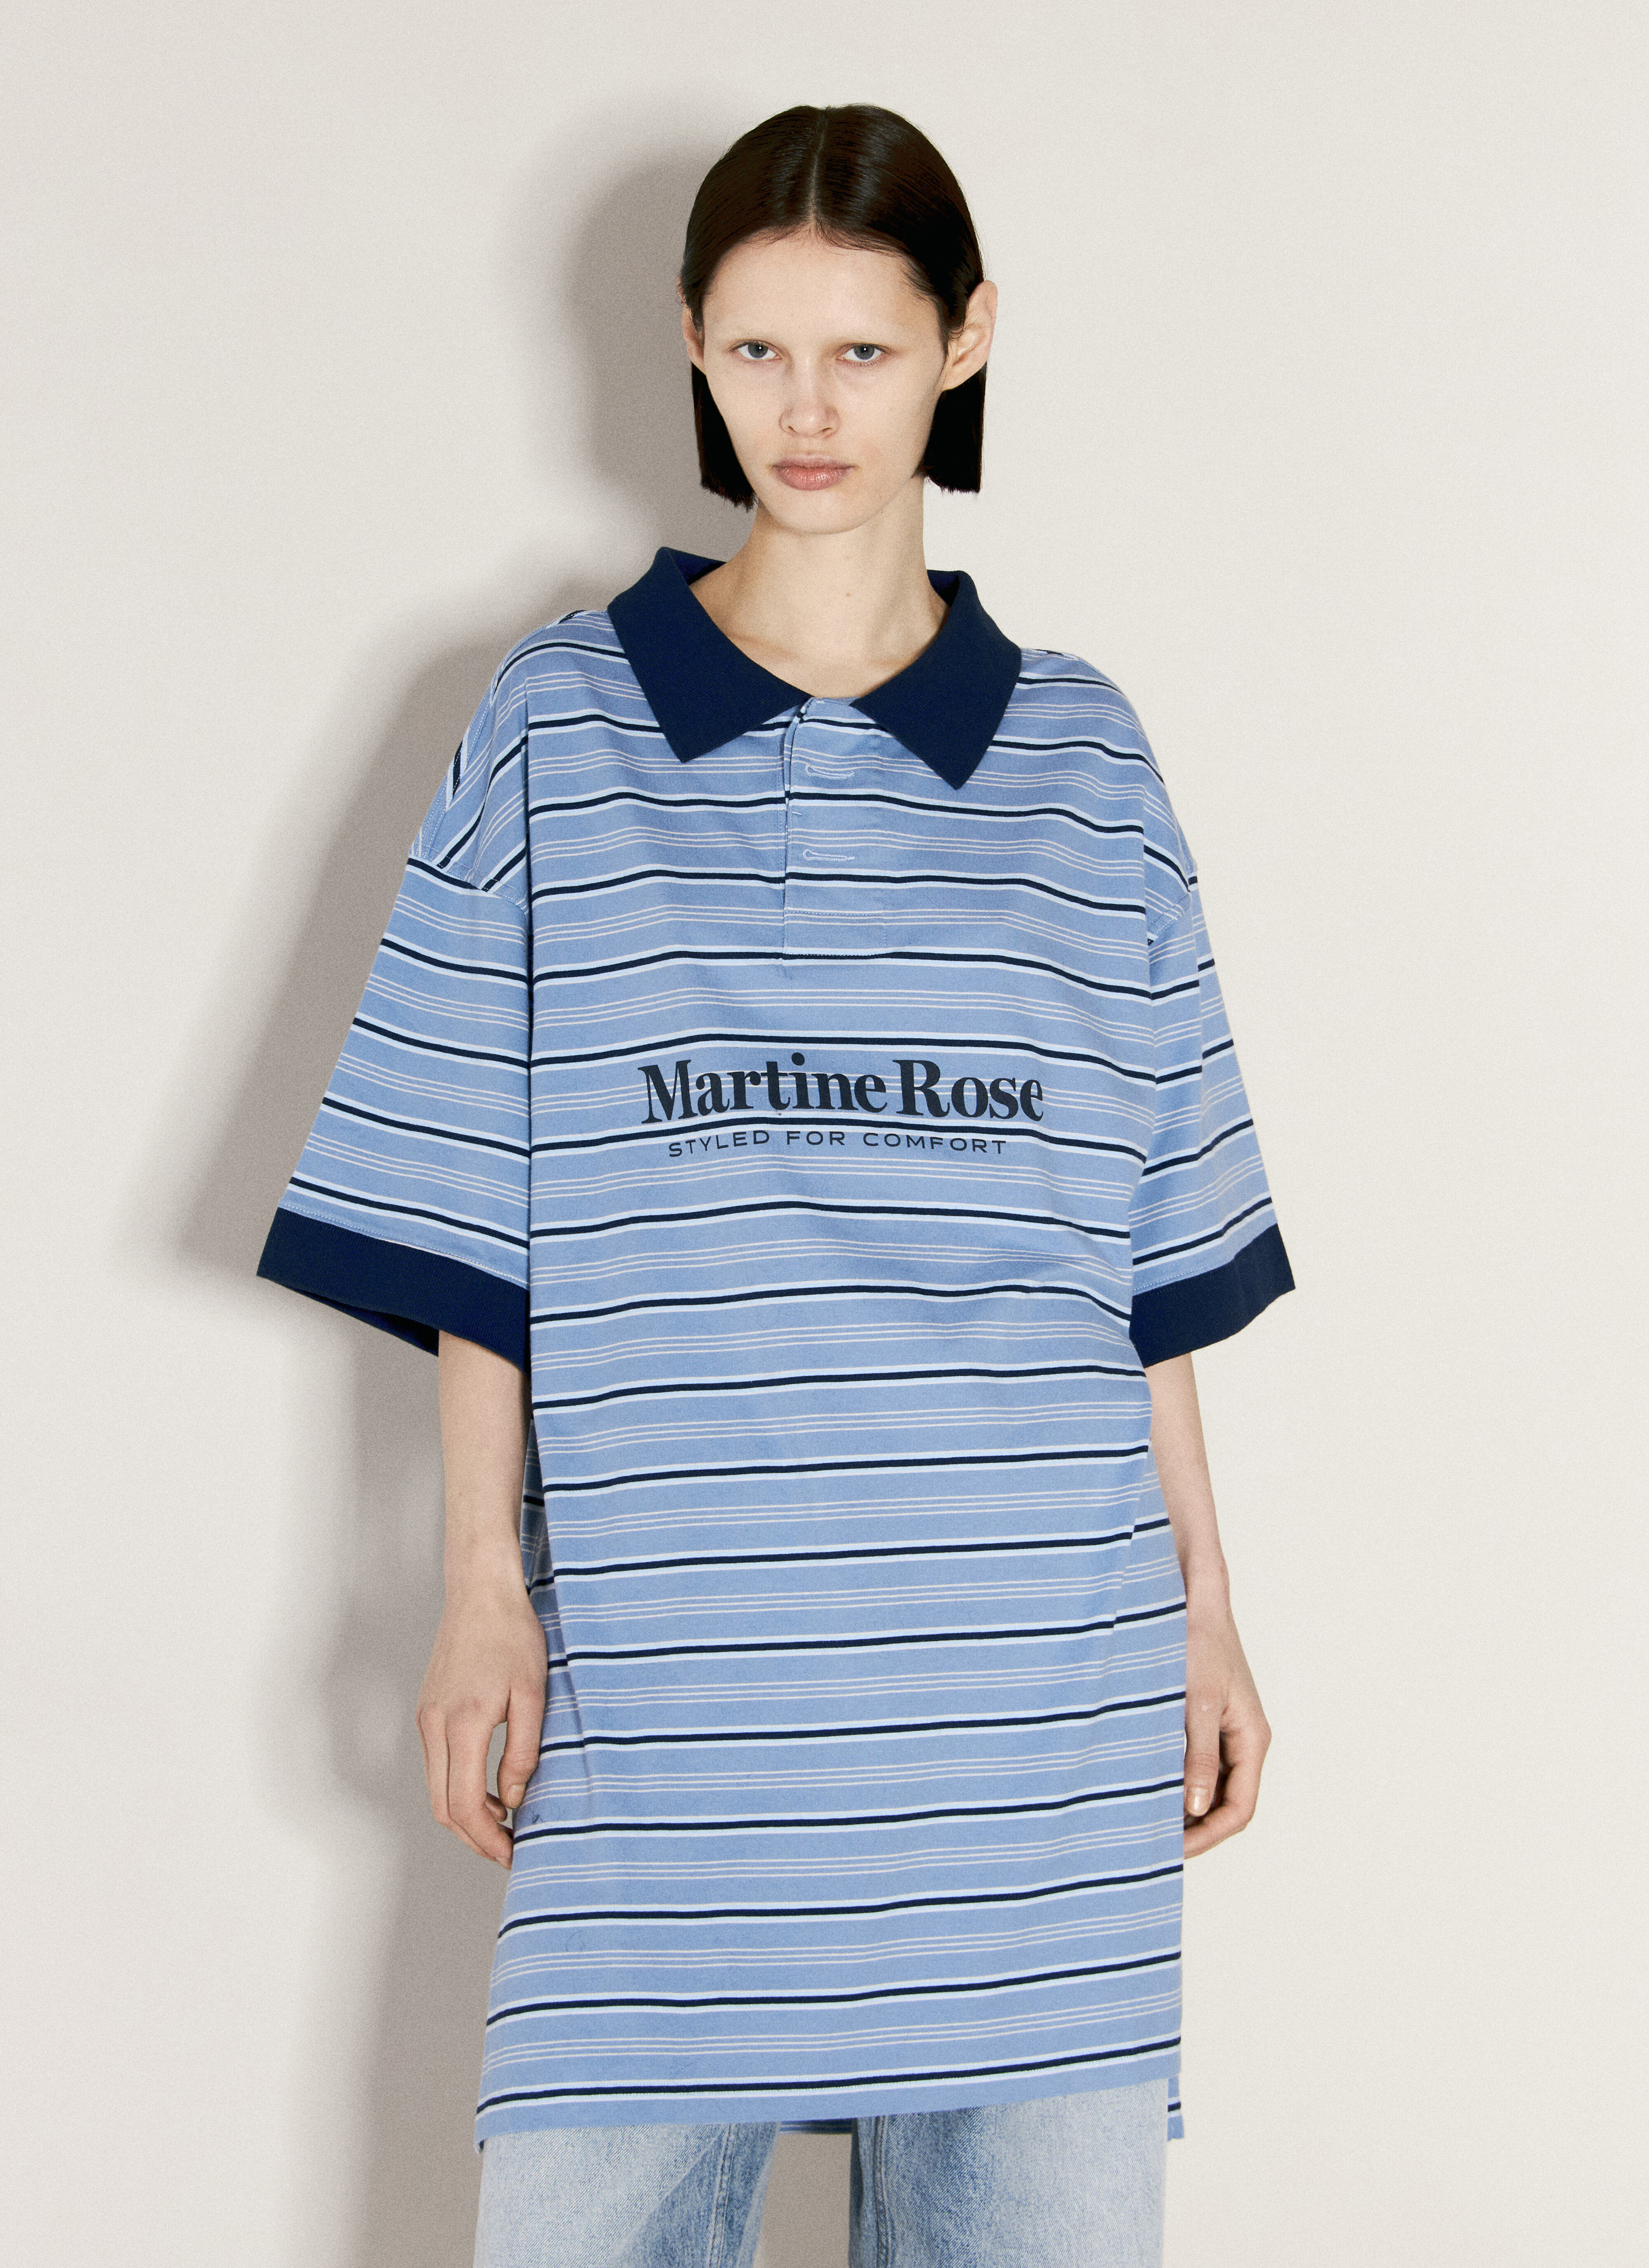 Martine Rose Striped Polo Shirt Pink mtr0255002